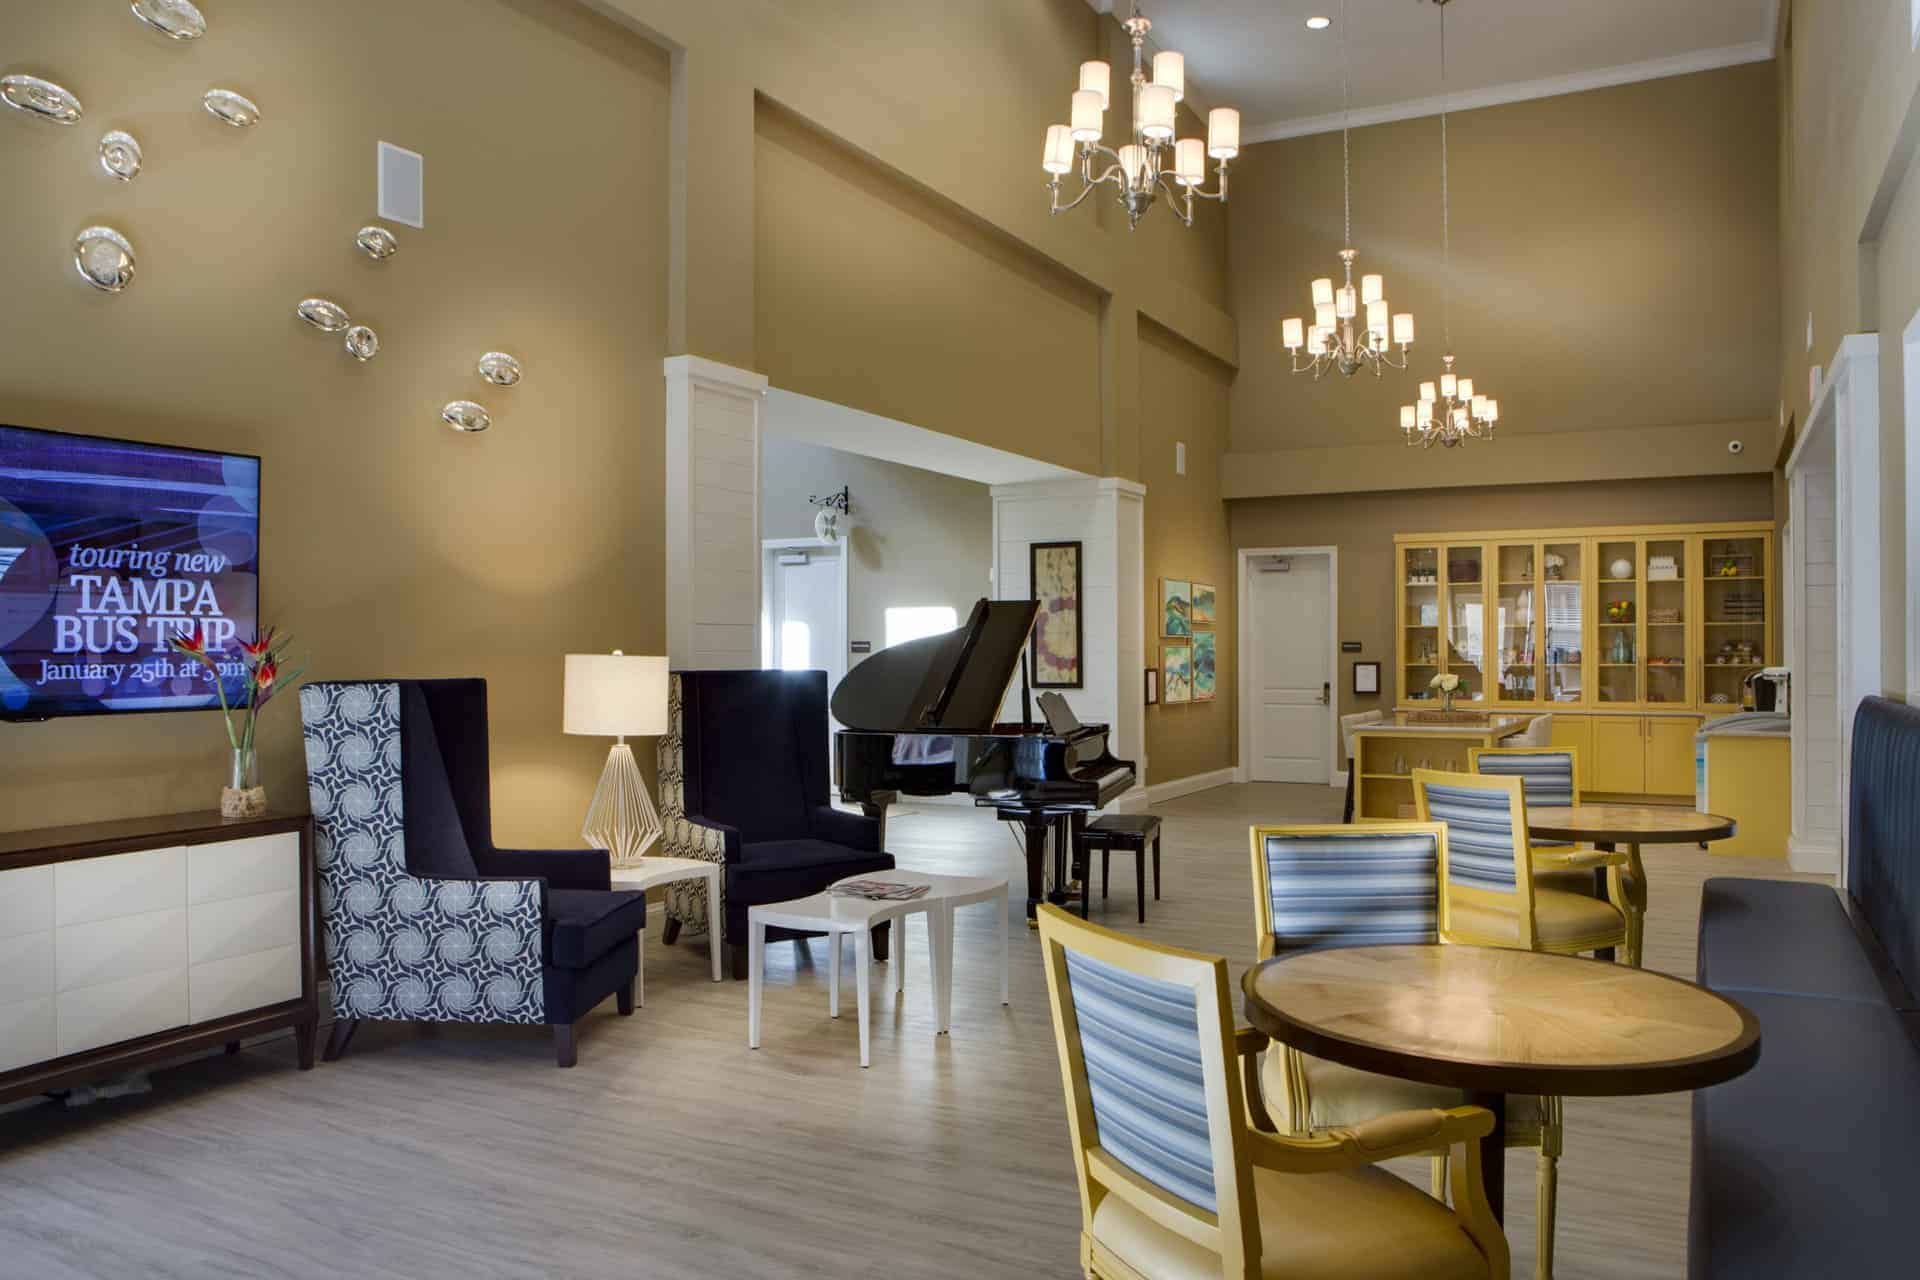 The Legacy at Highwoods Preserve features well-appointed information and entertainment spaces like this one. Image Source: The Legacy at Highwoods Preserve